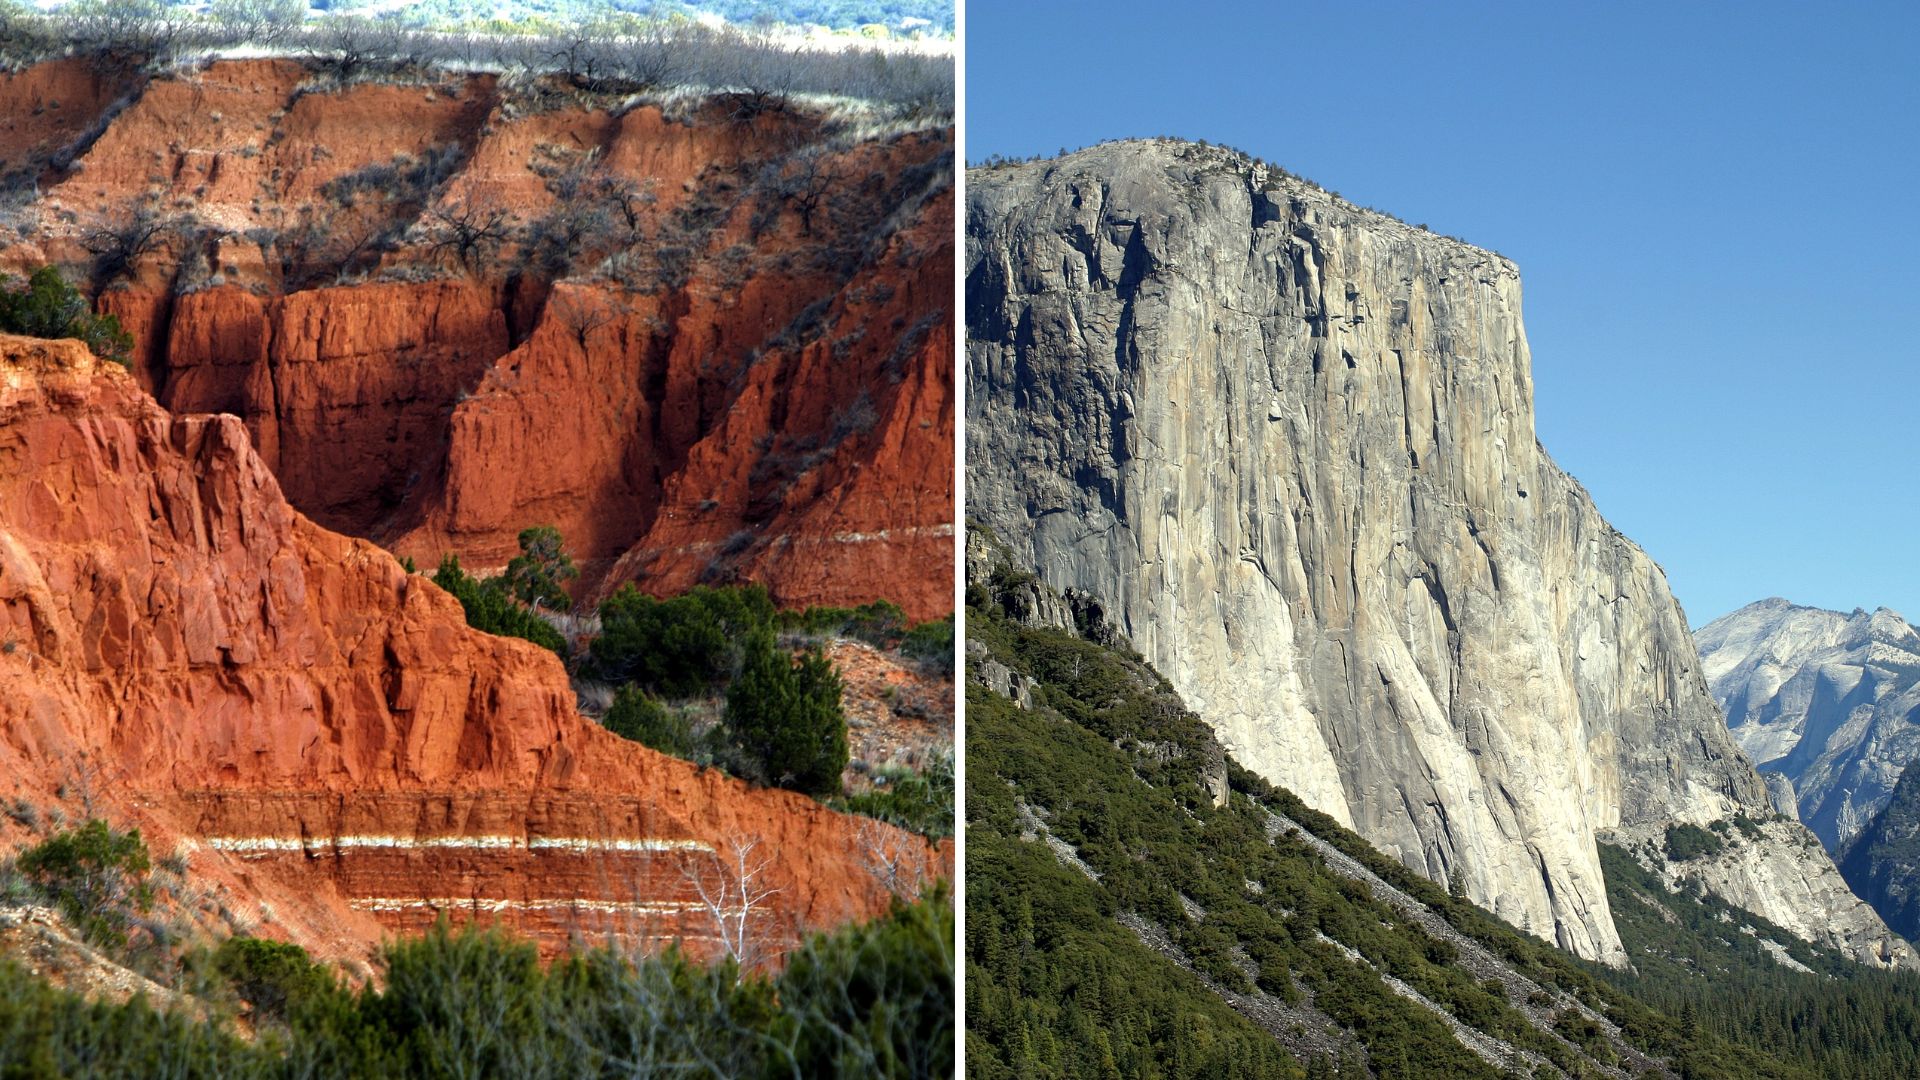 Two pictures of rock formations. On the left, red and stratified desert rock formations are shown. On the right, the rock formation is gray and solid.